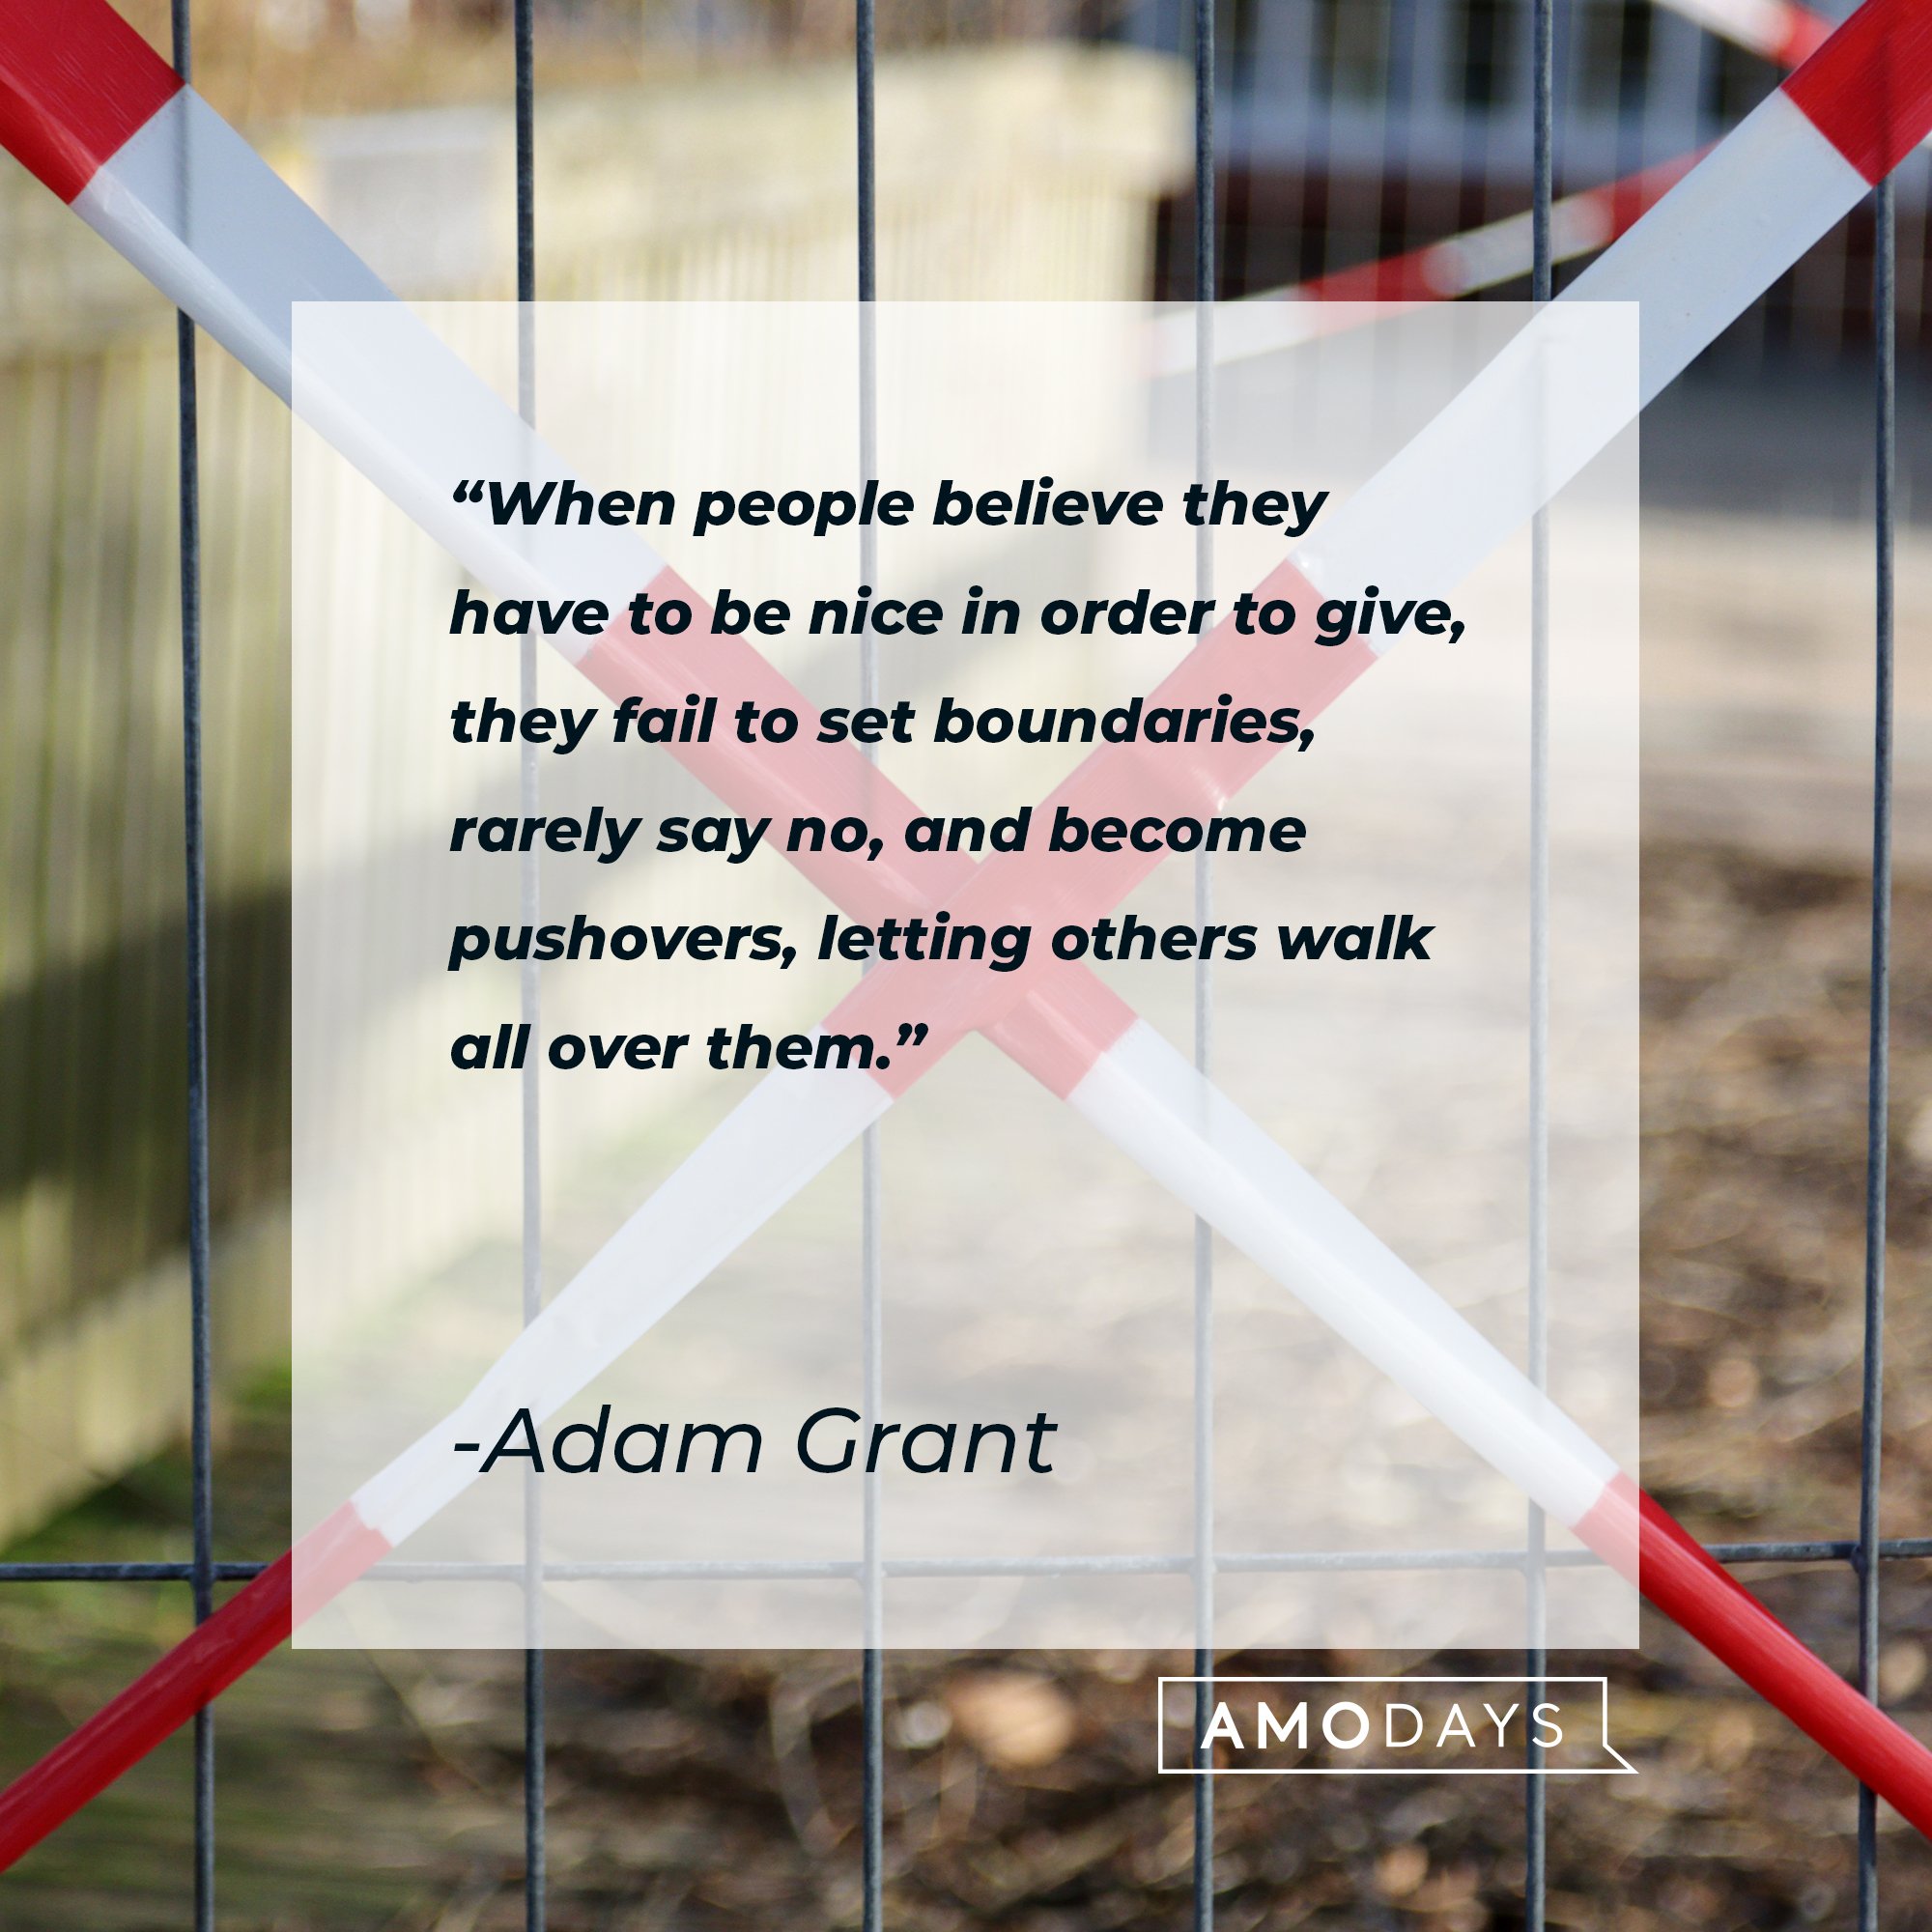 Adam Grant’s quote: "When people believe they have to be nice in order to give, they fail to set boundaries, rarely say no, and become pushovers, letting others walk all over them." | Image: AmoDays